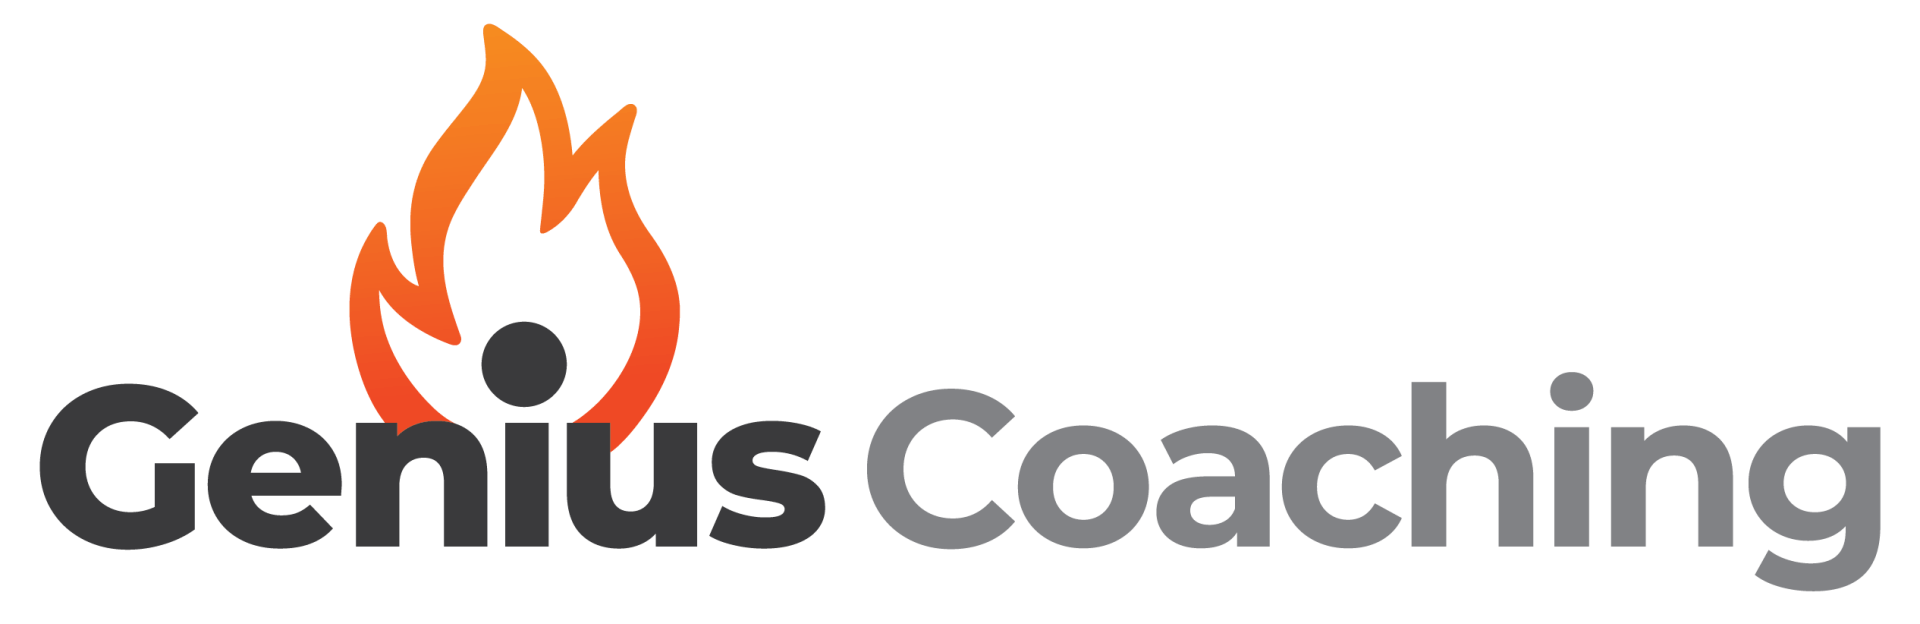 A logo for genius coaching with a flame and a person.